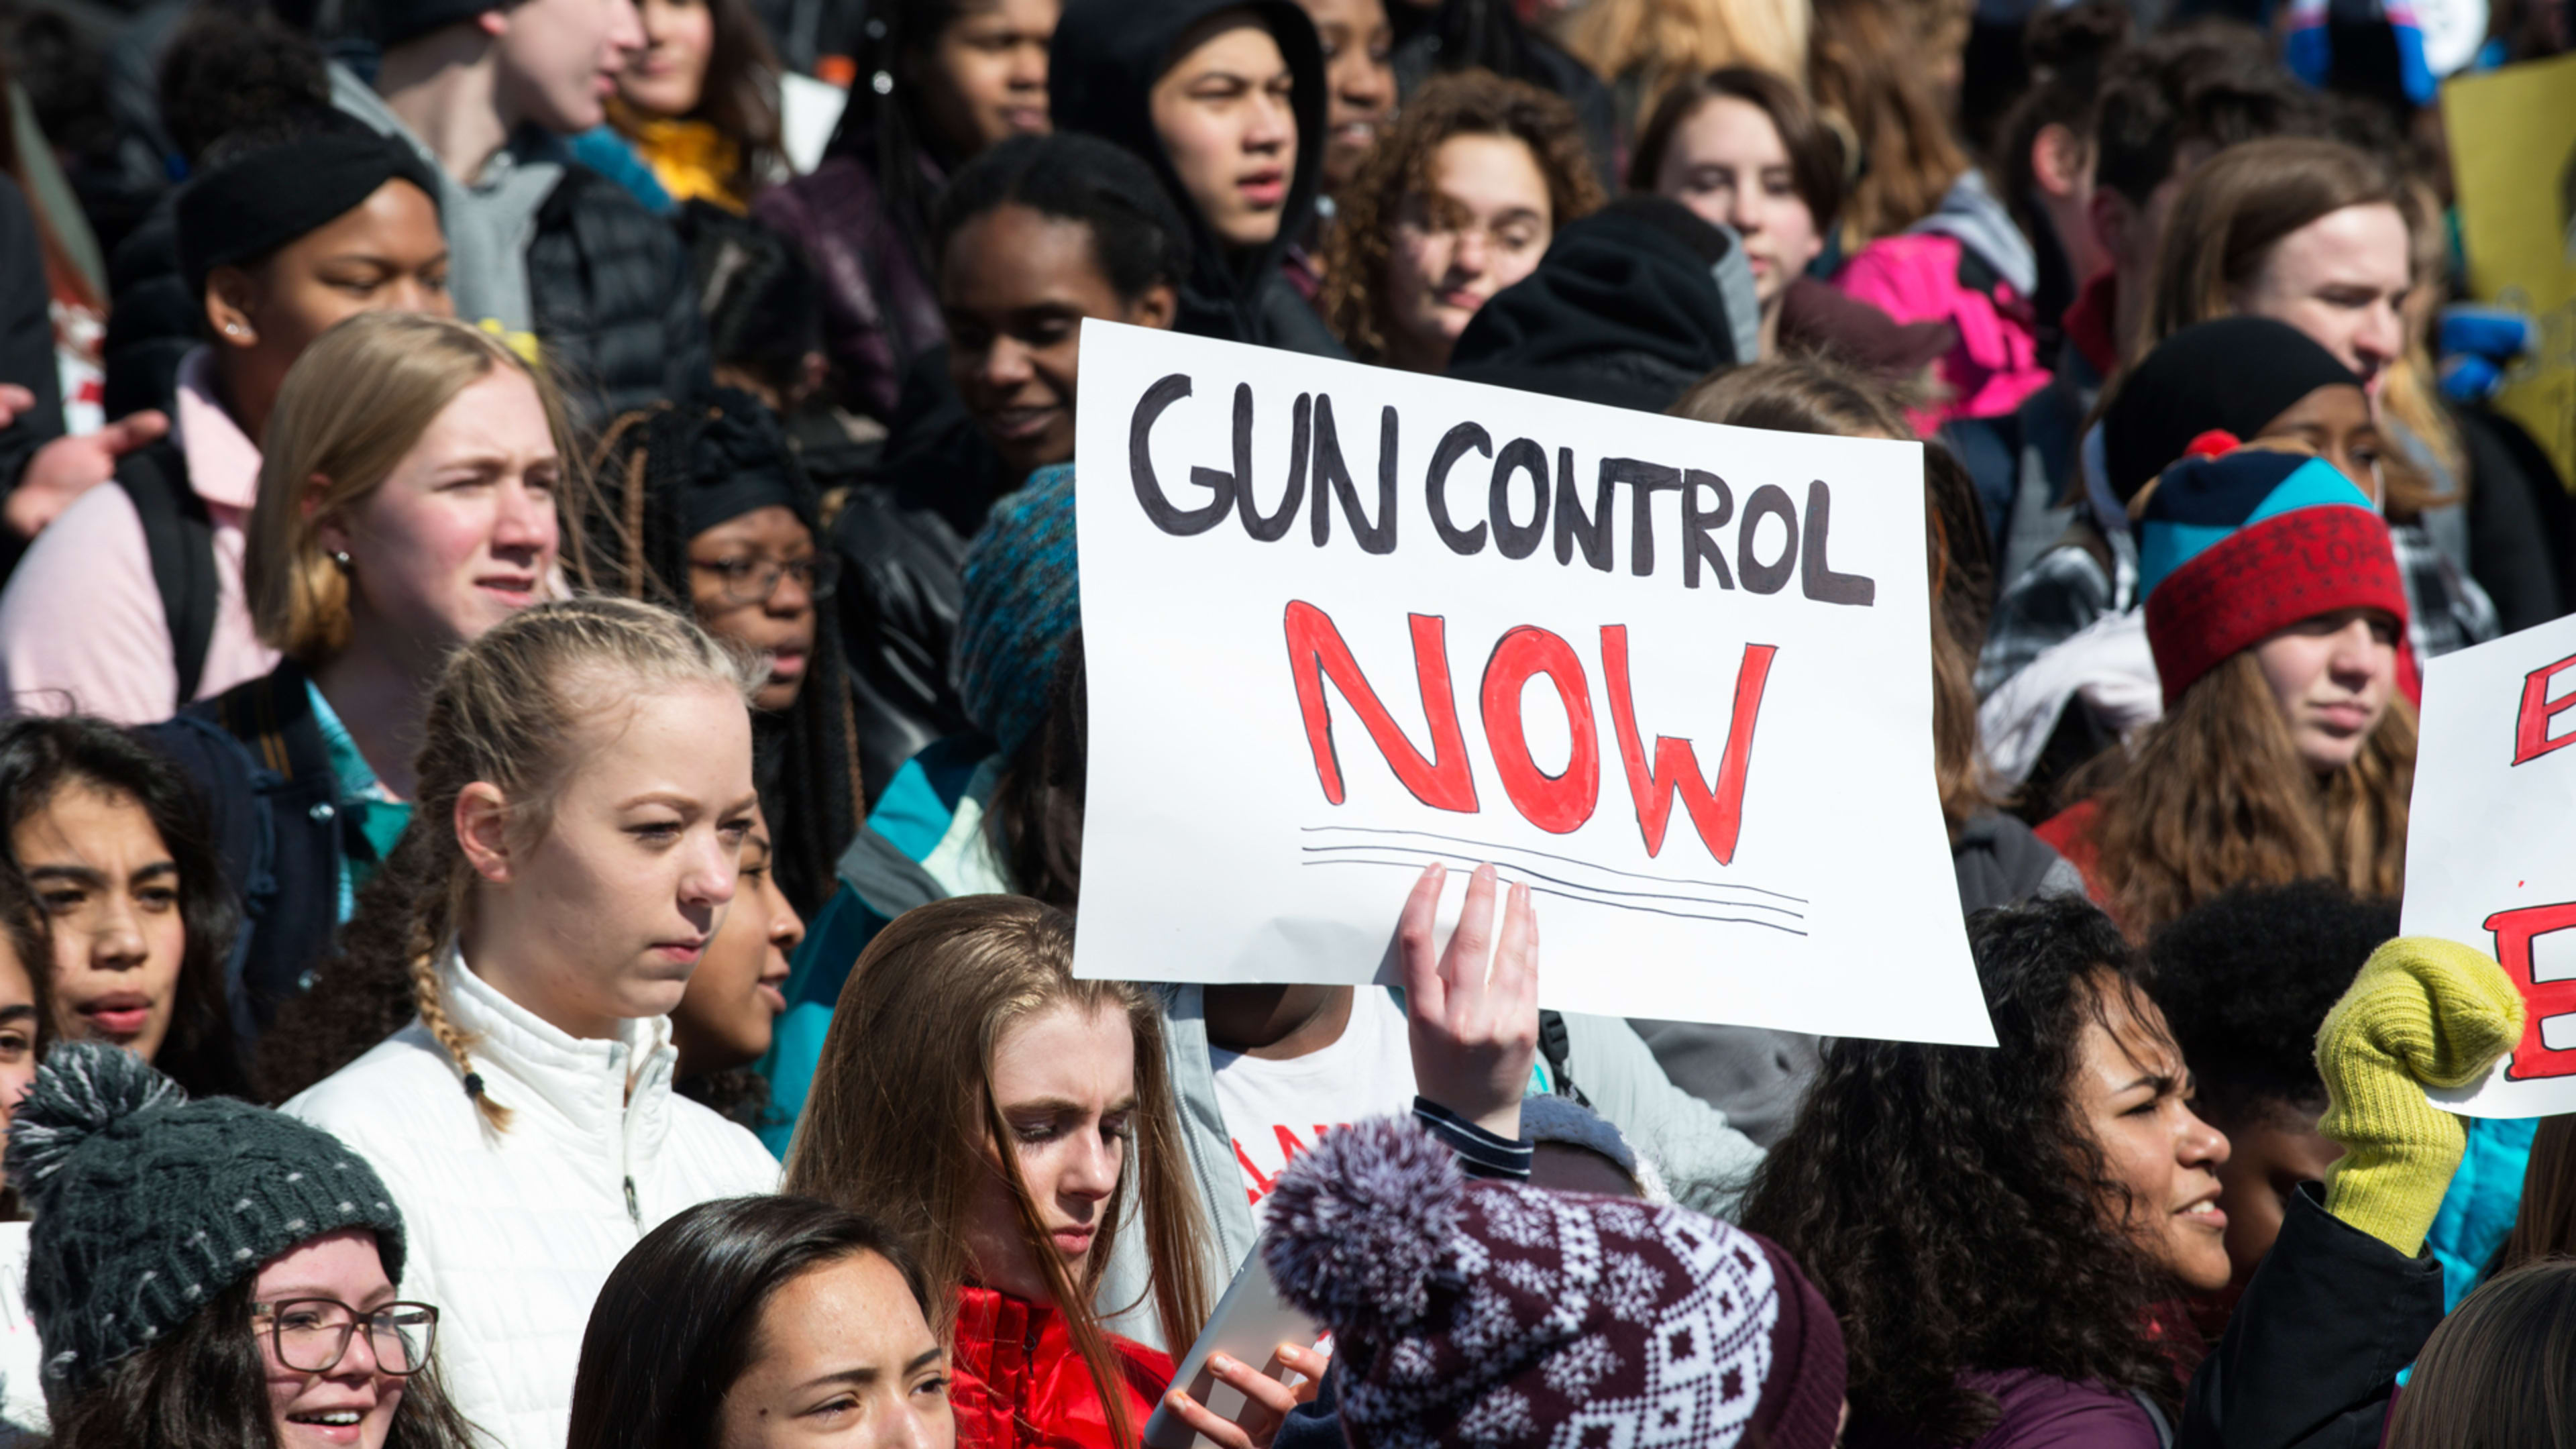 Airbnb, Pinterest, Reddit, Twitter, and Uber leaders urge an expansion of gun control laws